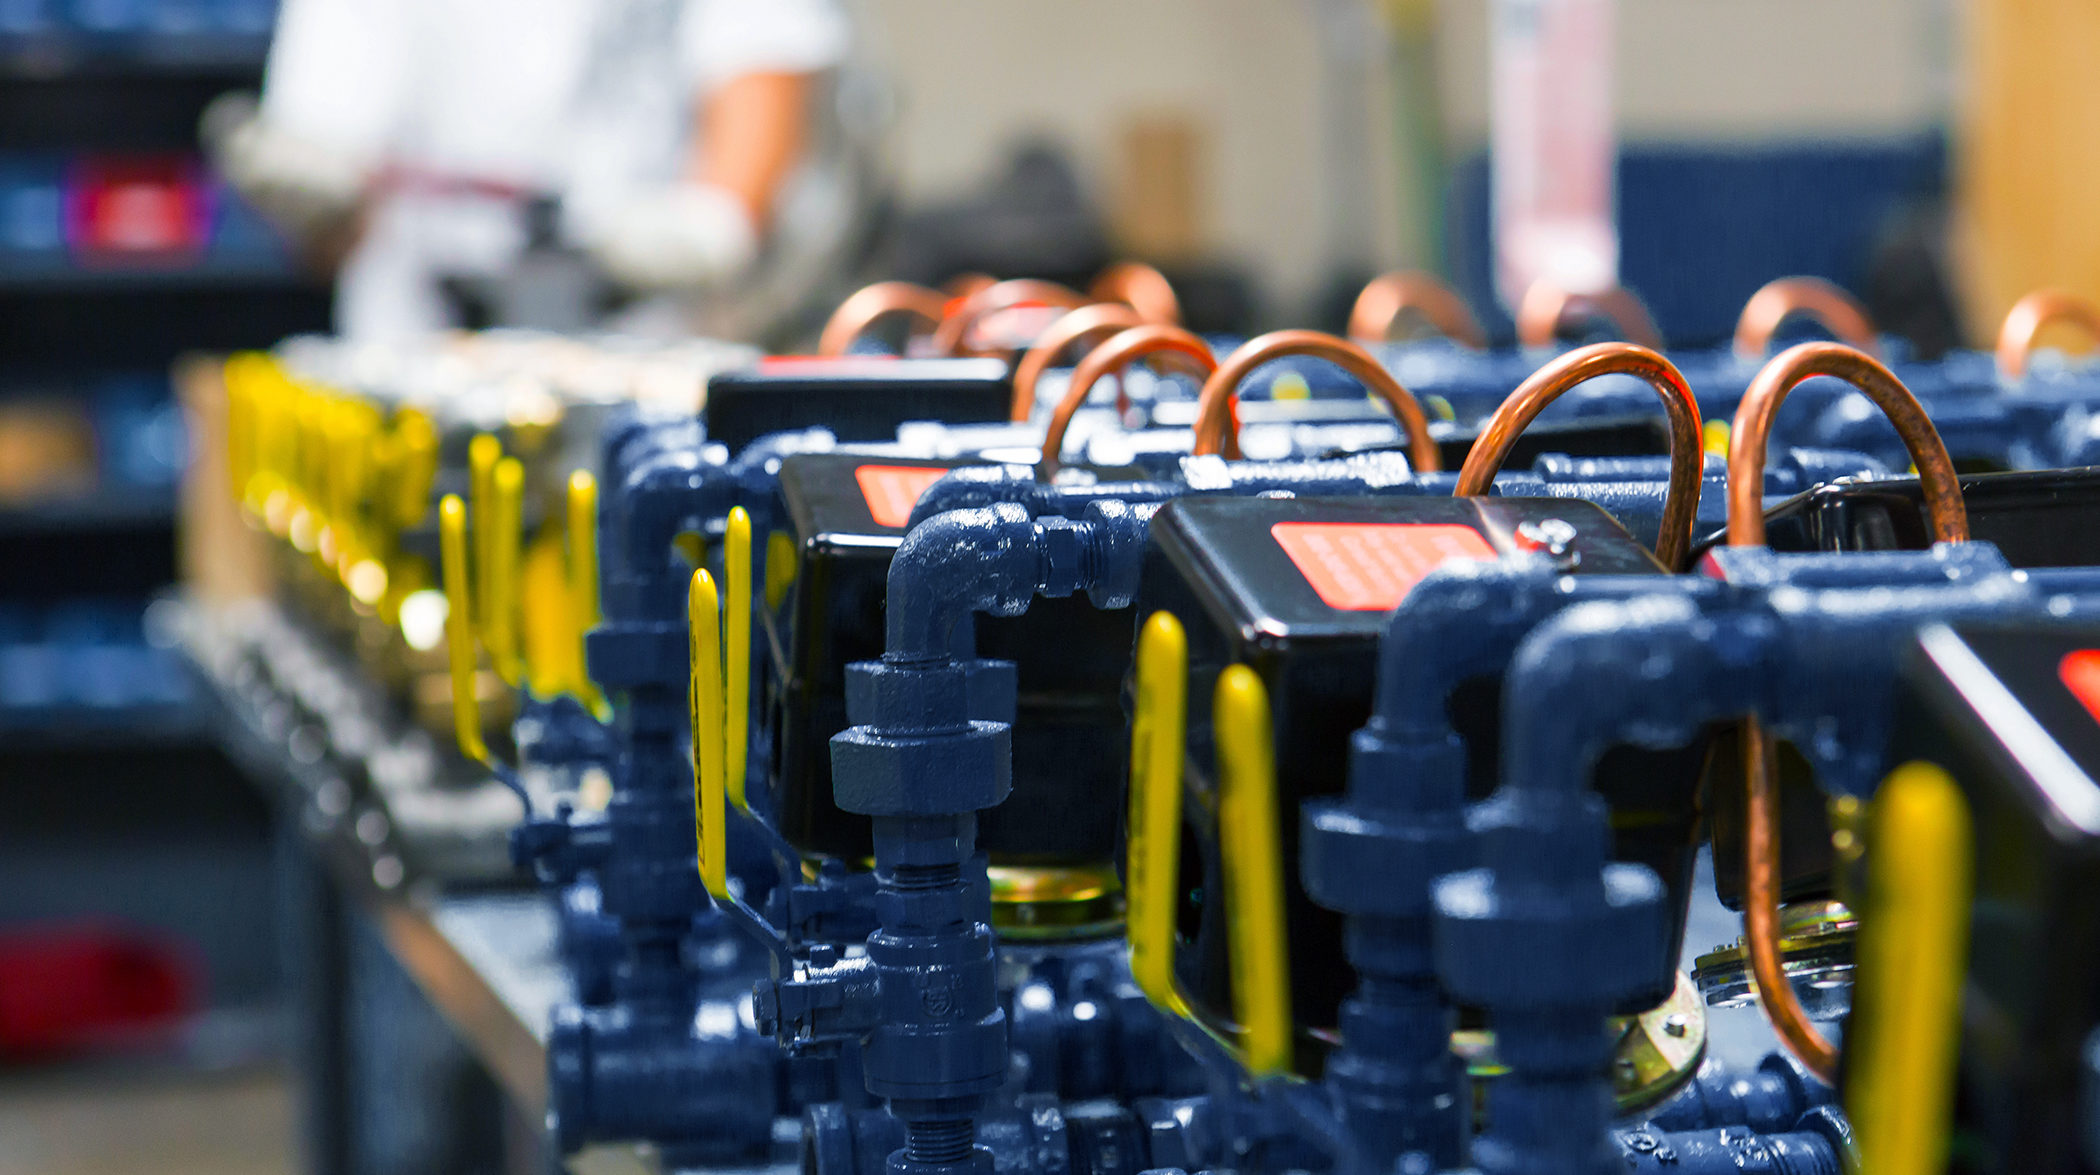 a row of blue and yellow valves with a red label that says ' warning ' on it